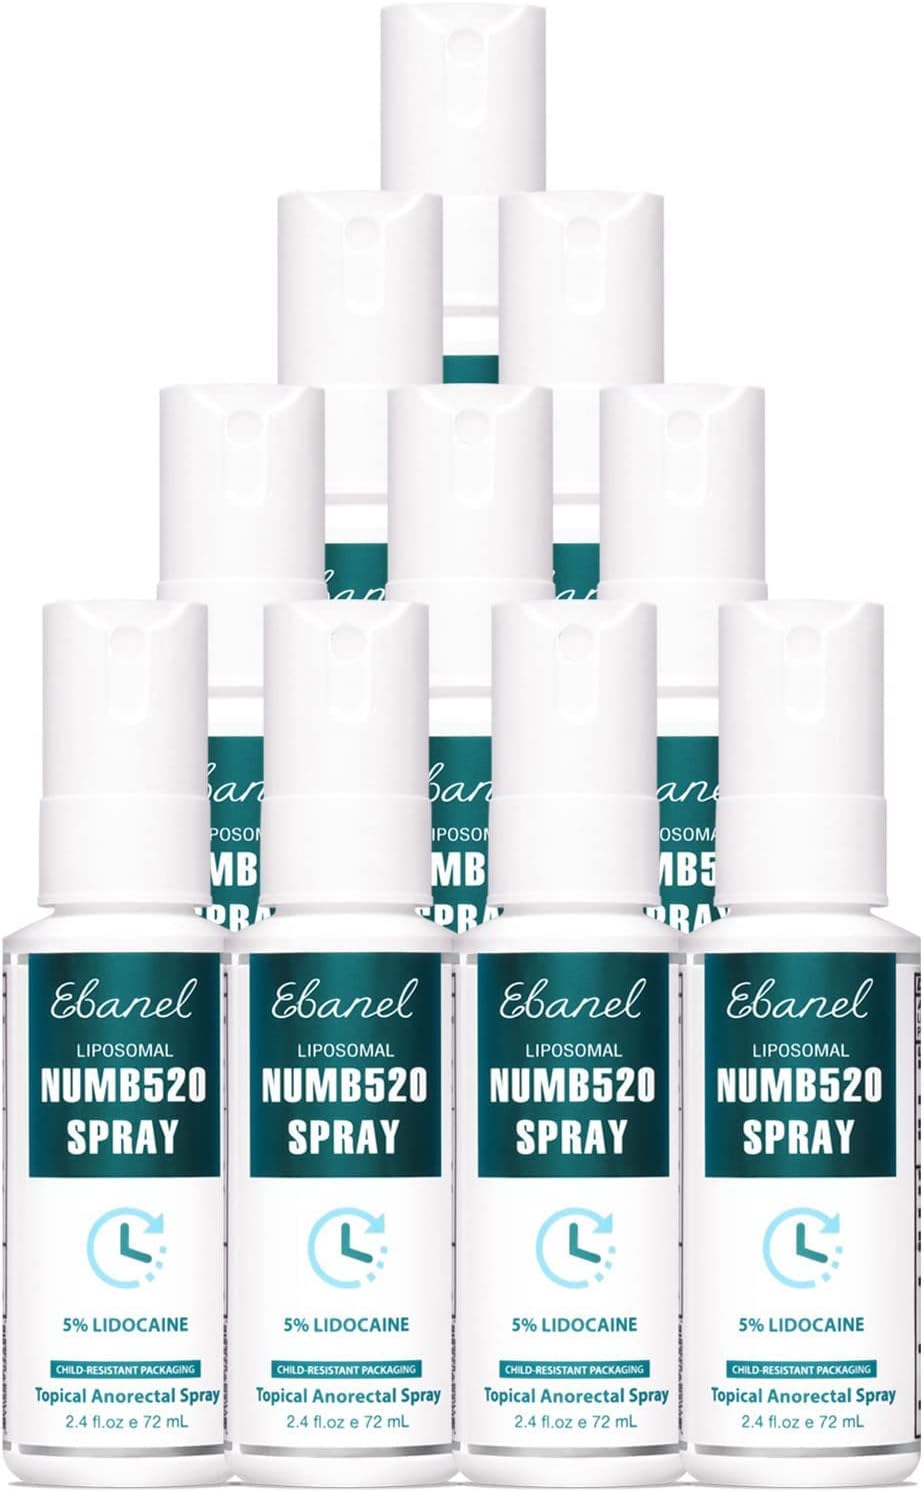 Ebanel 10-Pack 5% Lidocaine Spray Pain Relief Numb520 Burn Itch Relief Numbing Spray for Skin, Topical Anesthetic Postpartum Hemorrhoid Treatment Spray with Phenylephrine for Local and Anorectal Uses